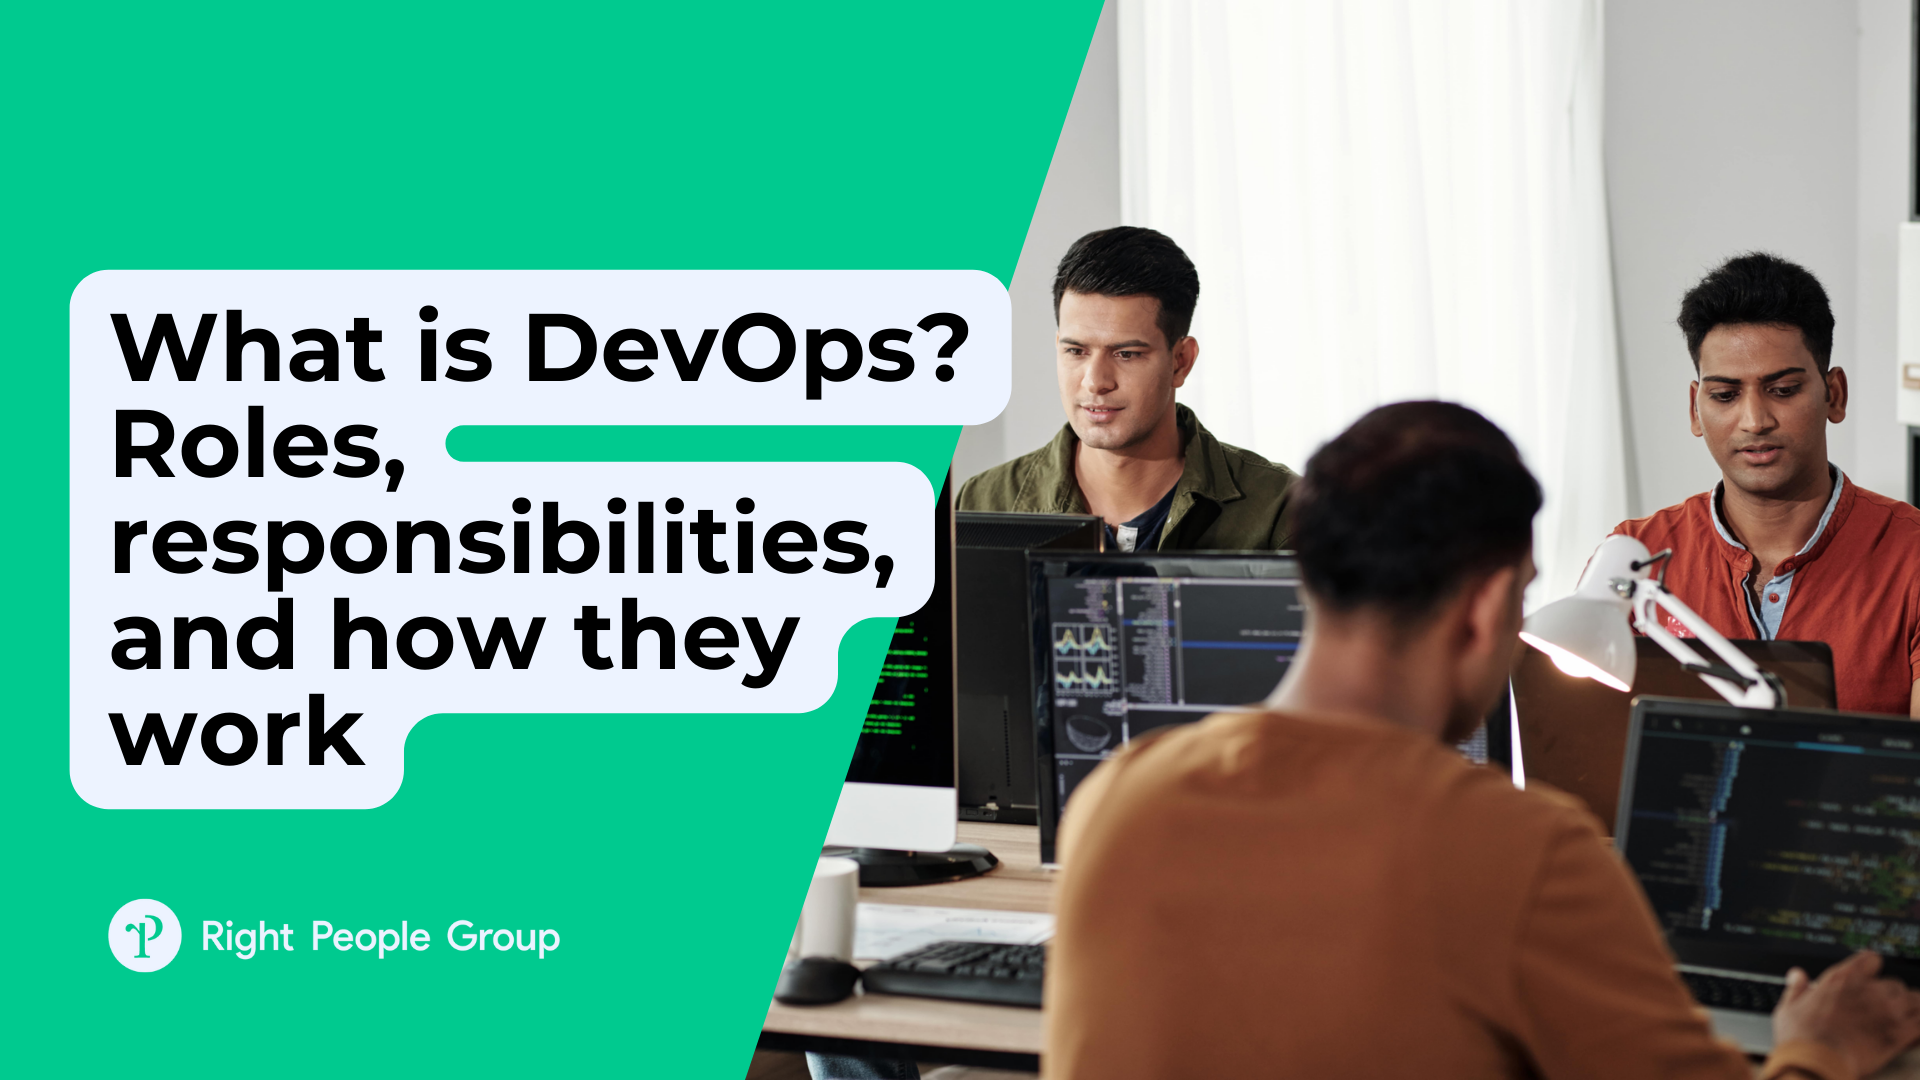 What is DevOps? DevOps team roles, responsibilities, and how they work